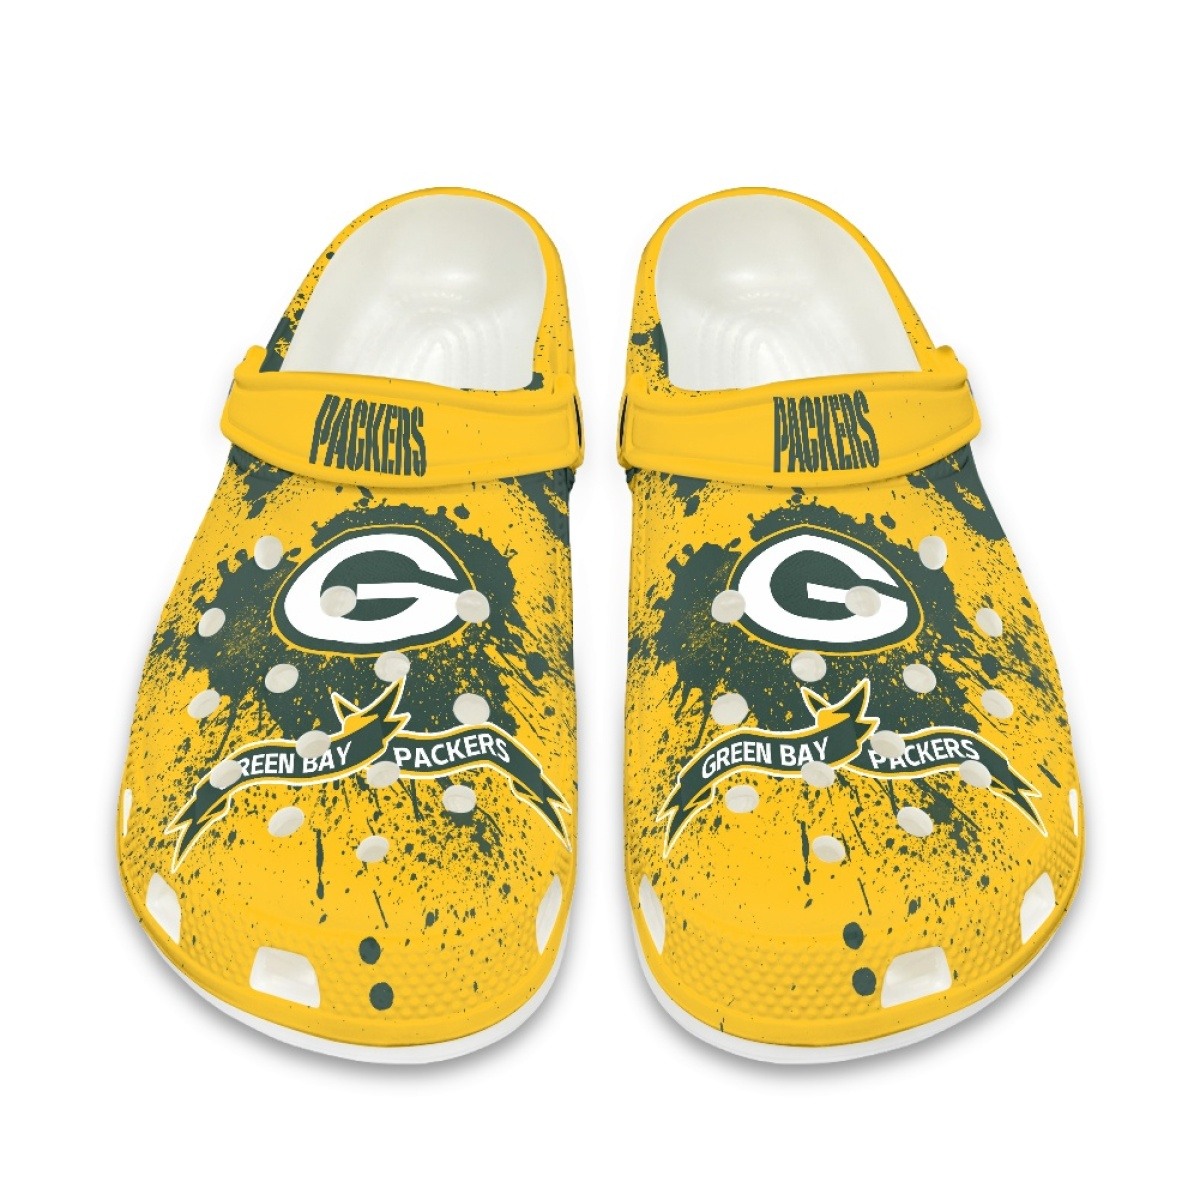 Green Bay Packers Crocs shoes cute Style#3 Shoes for fans -Jack sport shop